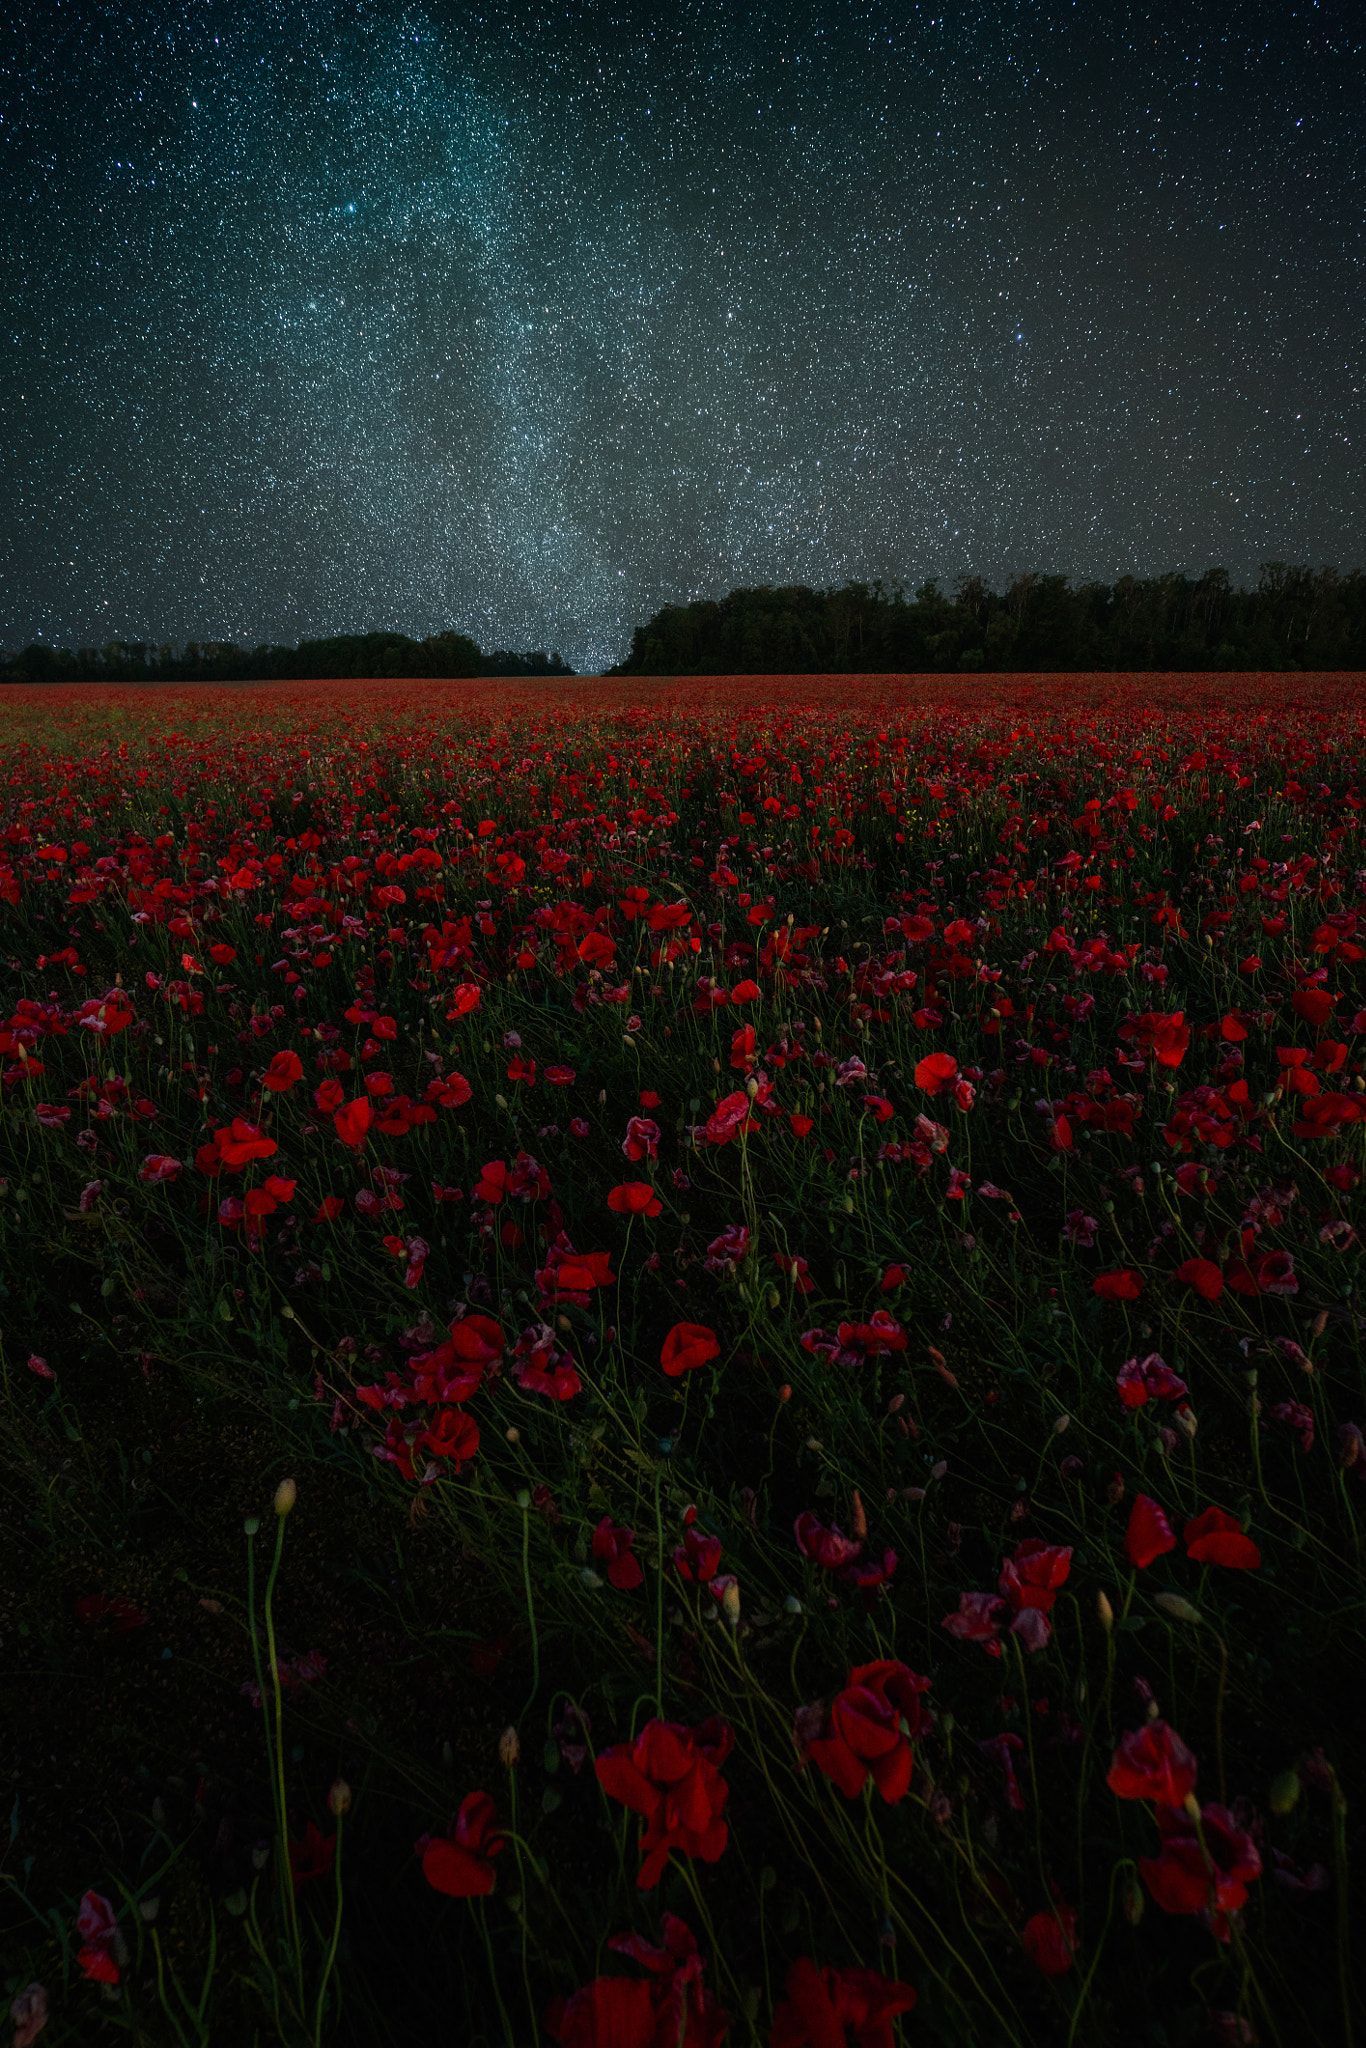 Poppies field at night